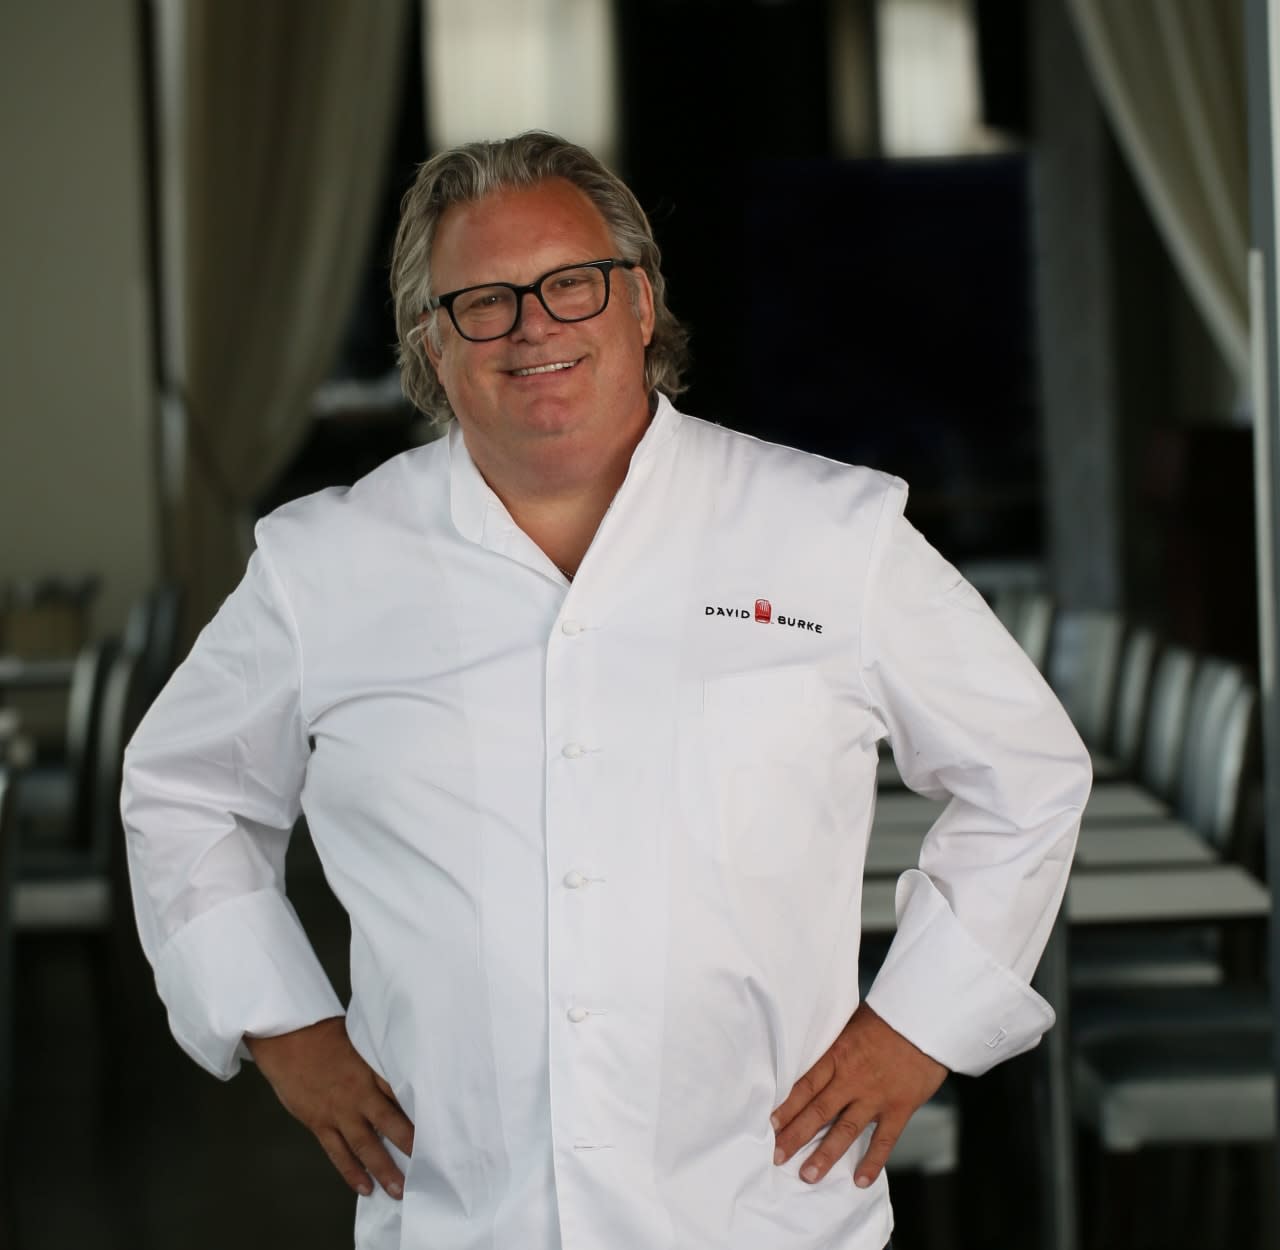 Celebrity chef David Burke is opening a restaurant in Westchester County.